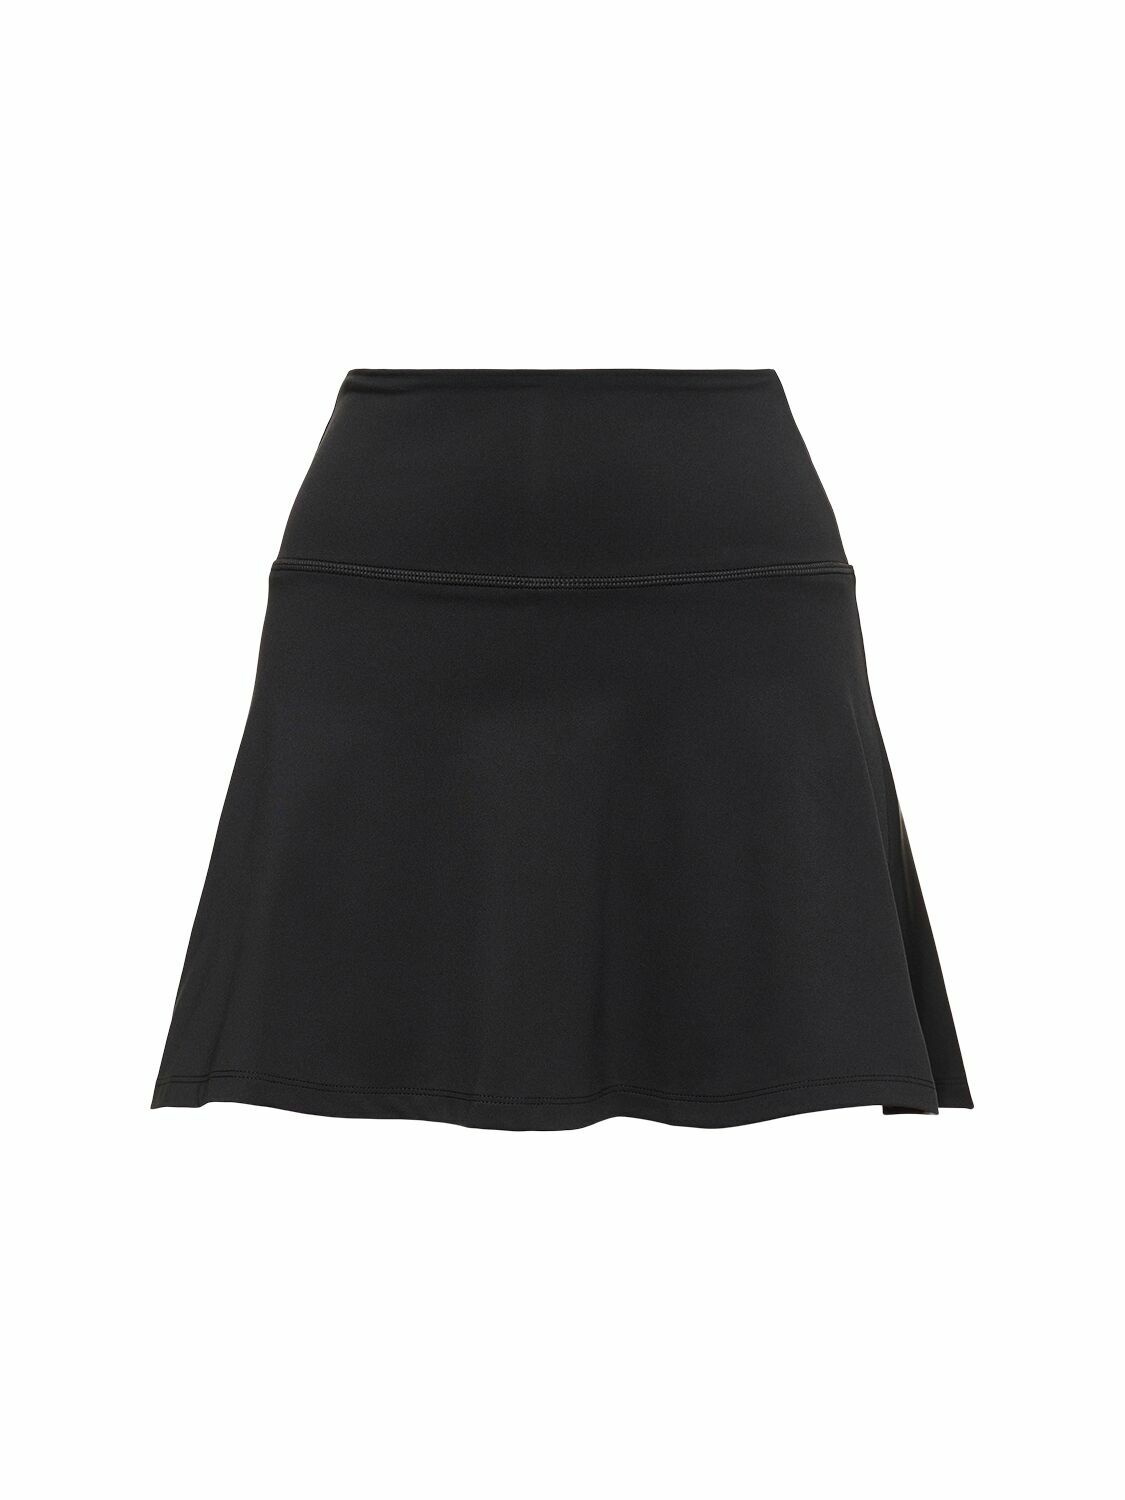 GIRLFRIEND COLLECTIVE - The High Rise Float Skort